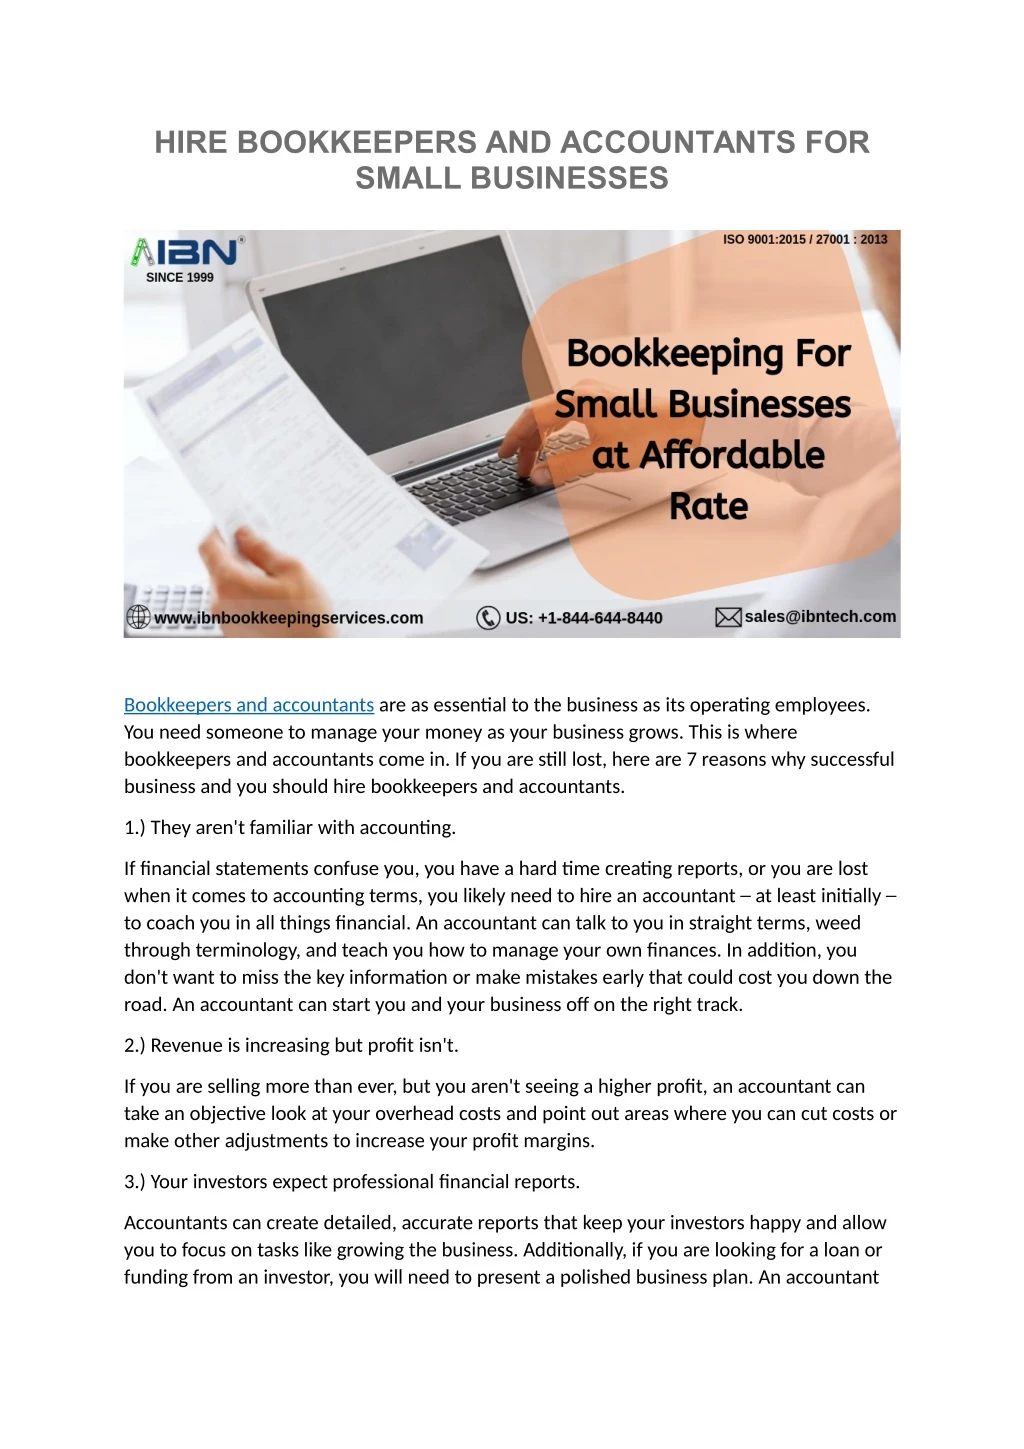 hire bookkeepers and accountants for small